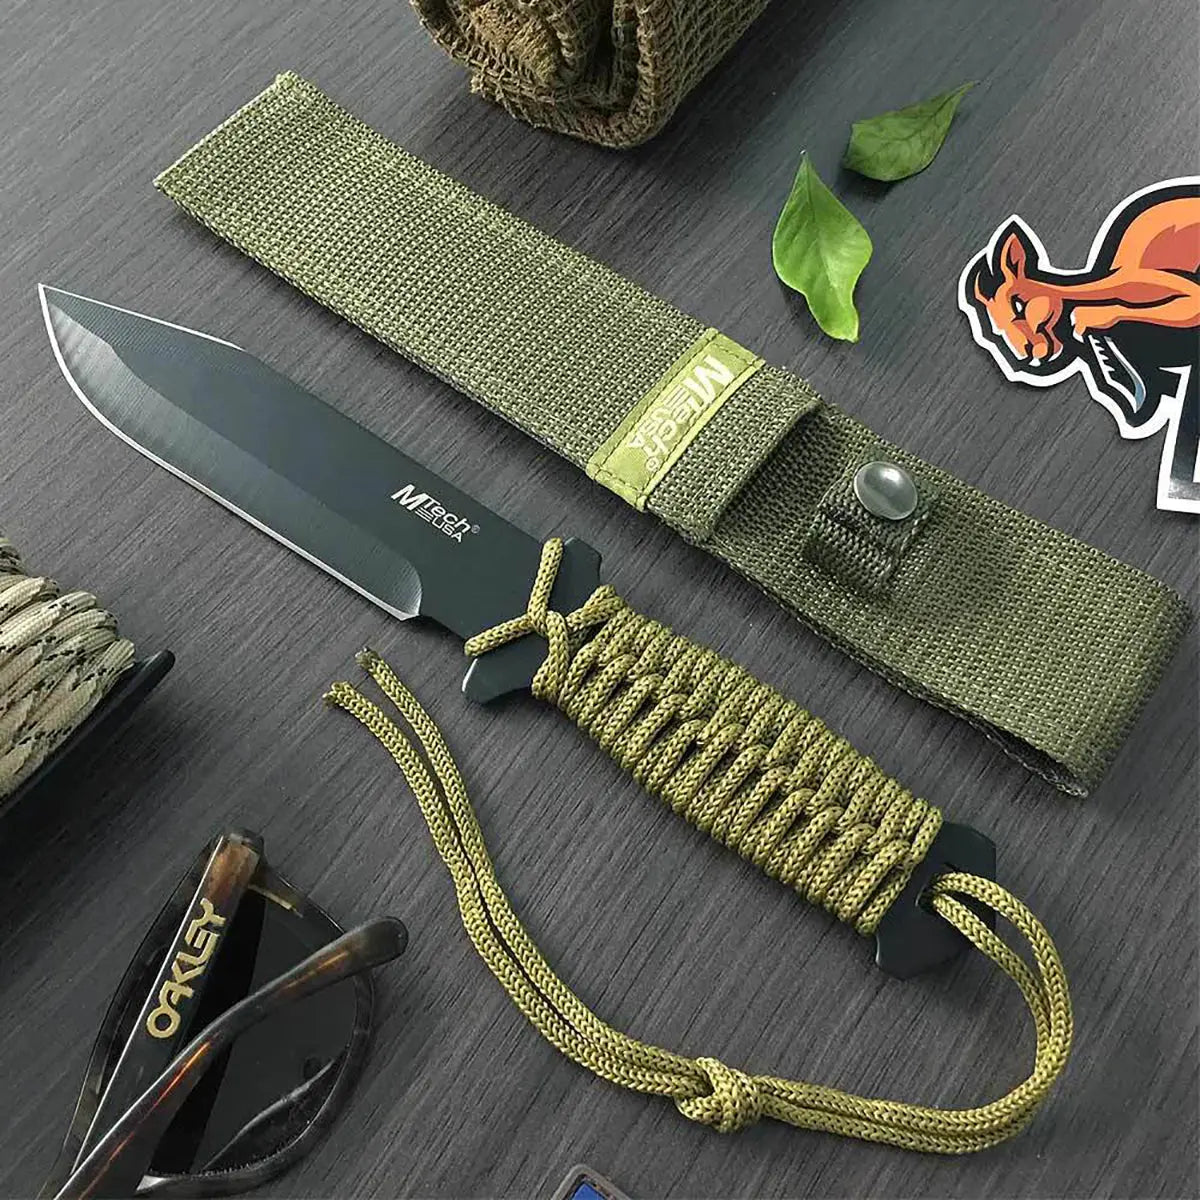 MTech USA Tactical Full Tang Fixed Blade Combat Knife, Cord Wrapped, MT-528C M-Tech